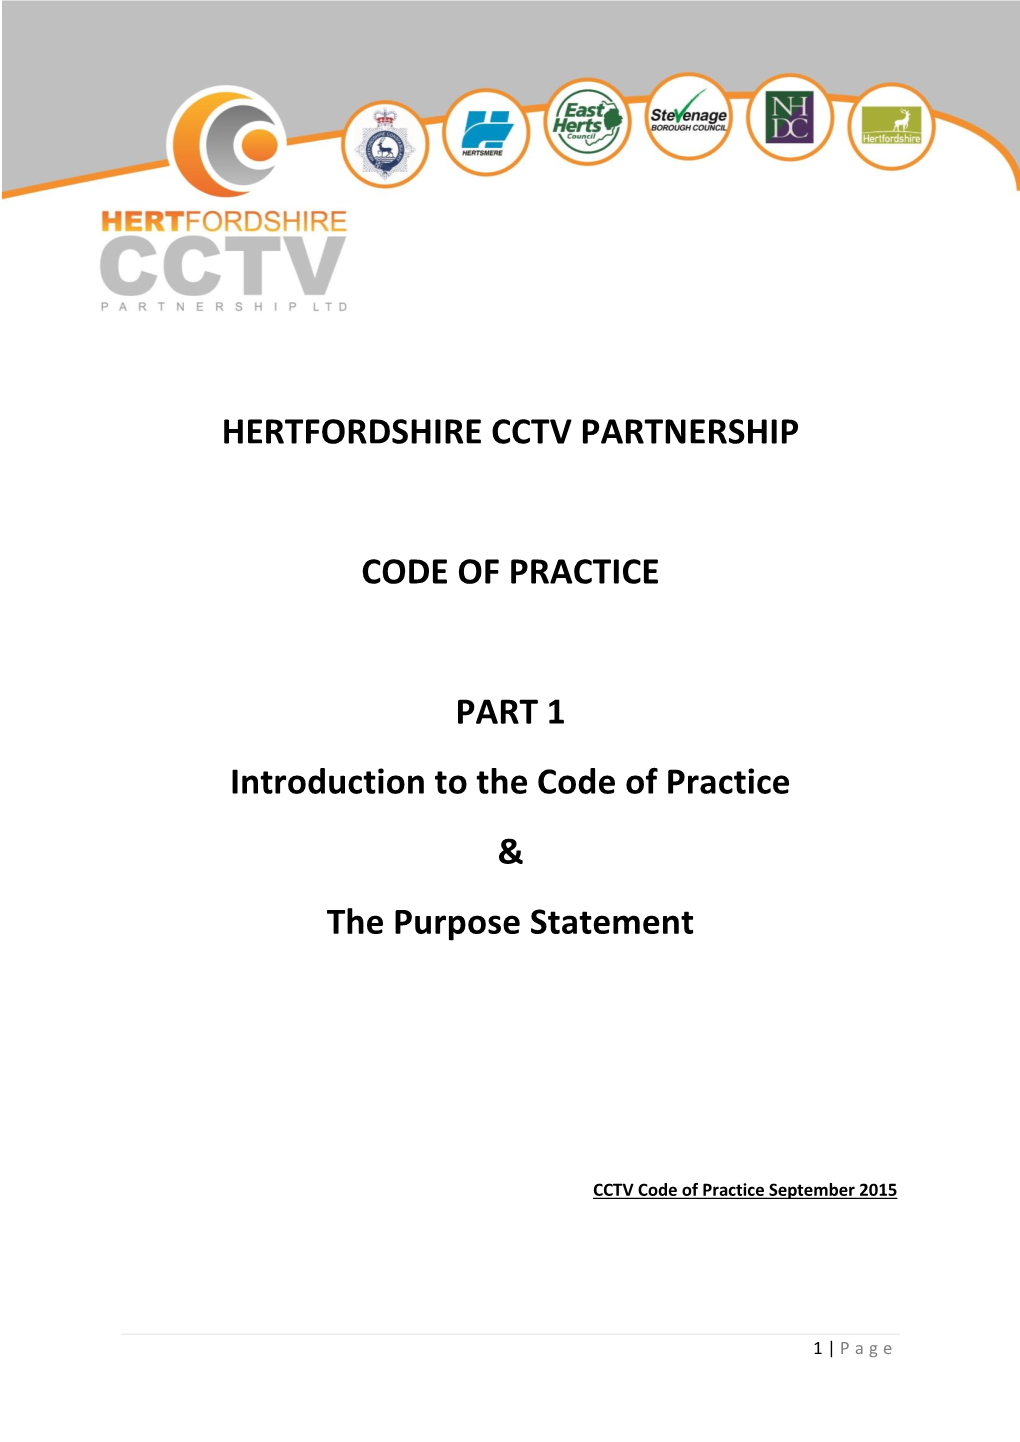 HERTFORDSHIRE CCTV PARTNERSHIP CODE of PRACTICE PART 1 Introduction to the Code of Practice & the Purpose Statement